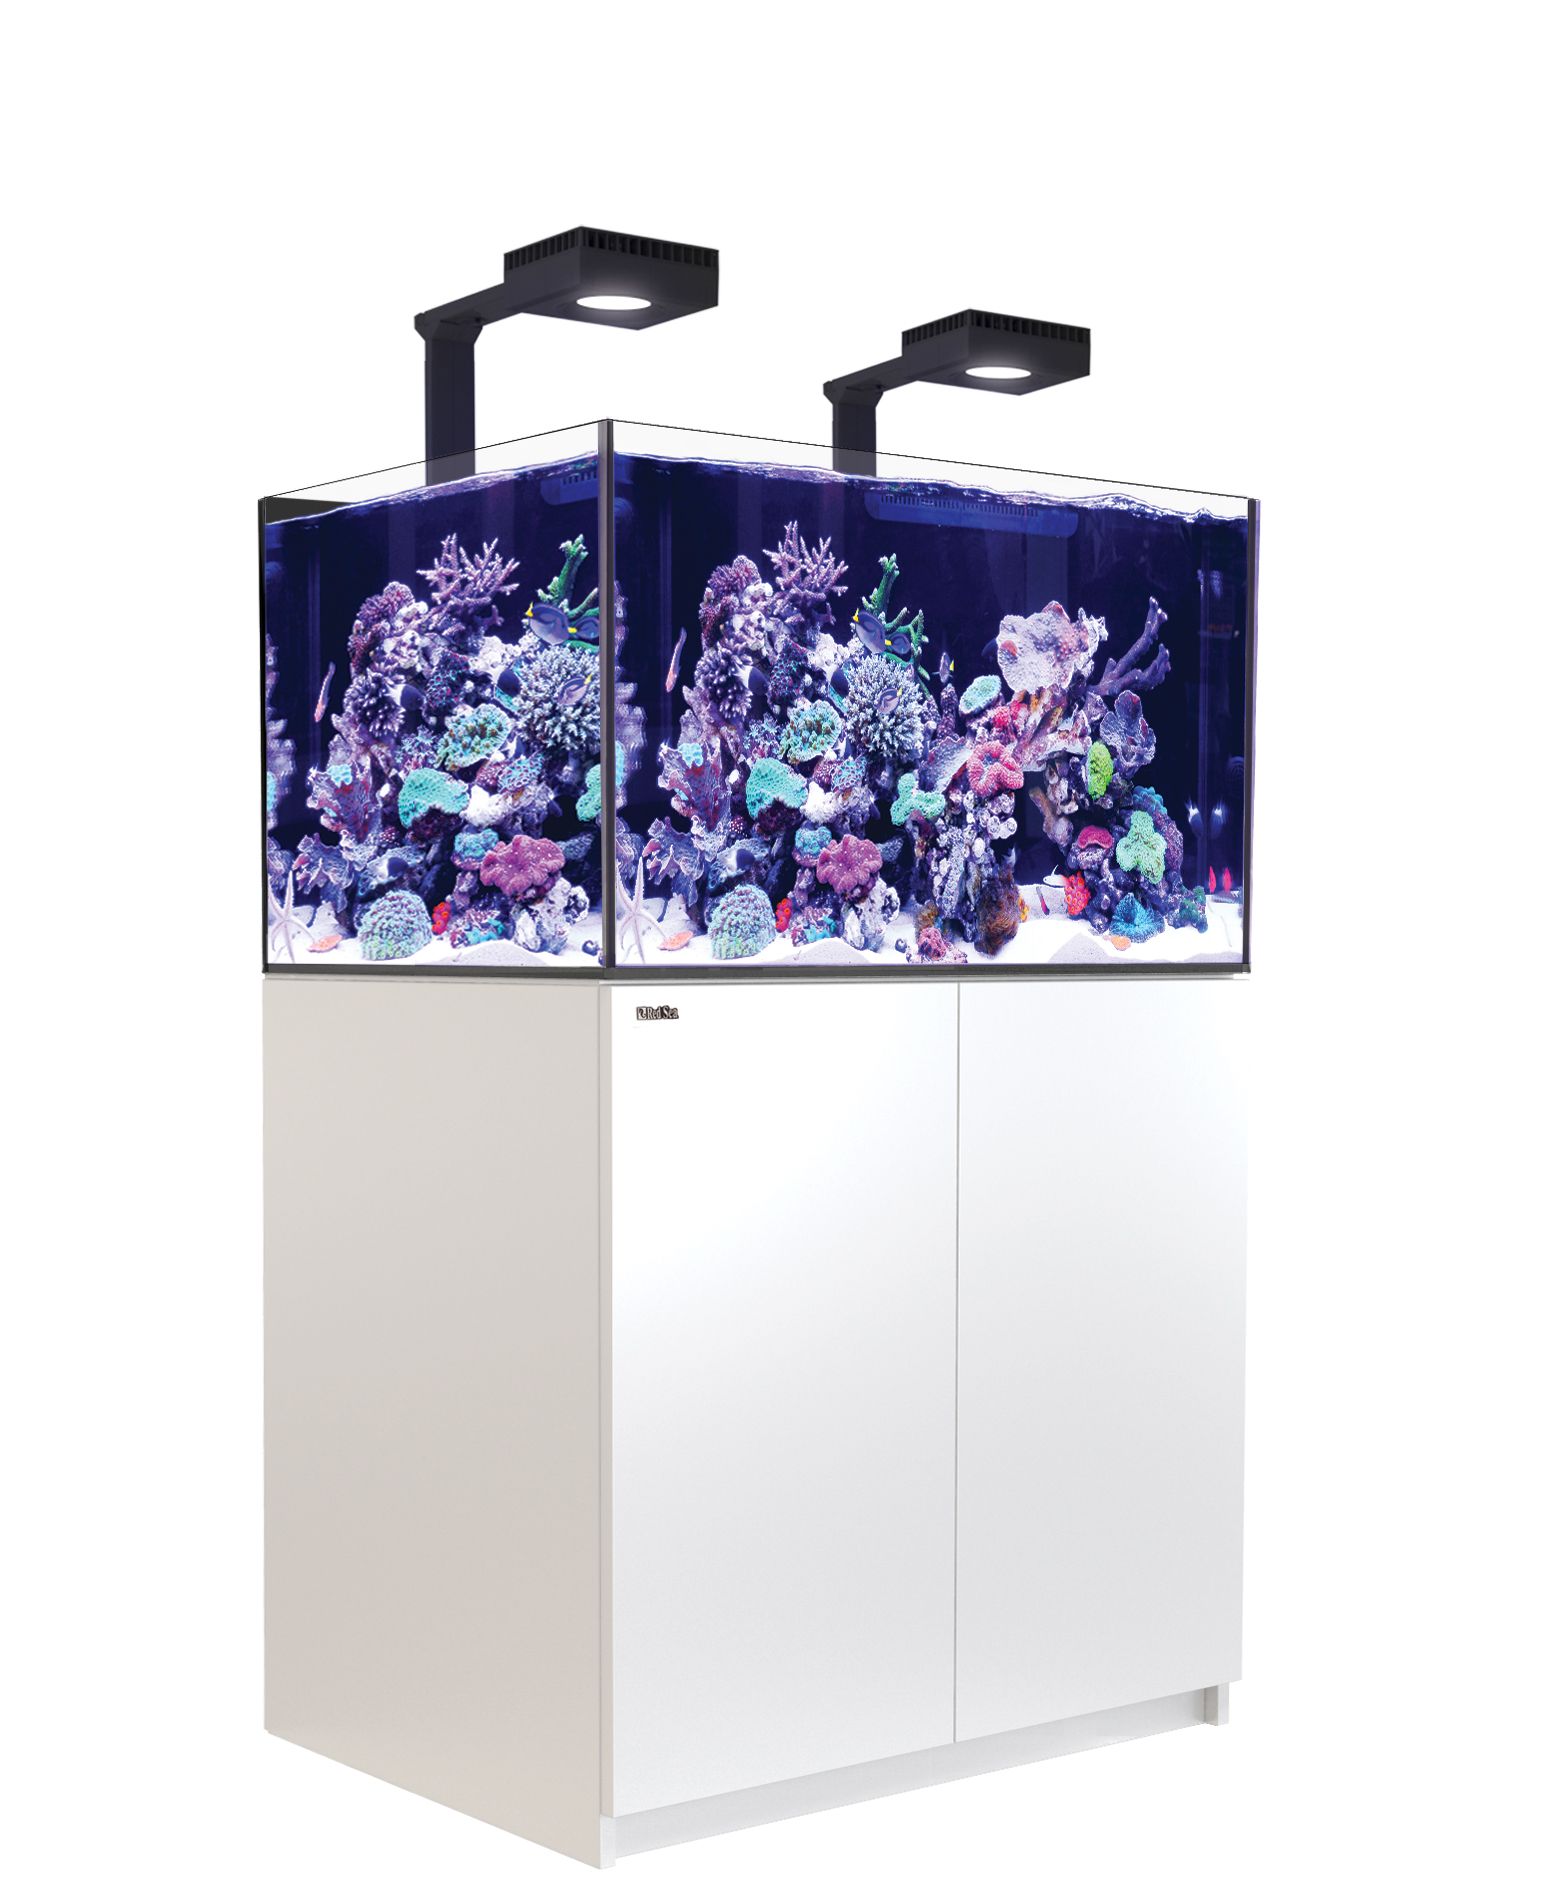 RED SEA Reefer 300 G2 Deluxe Complete System